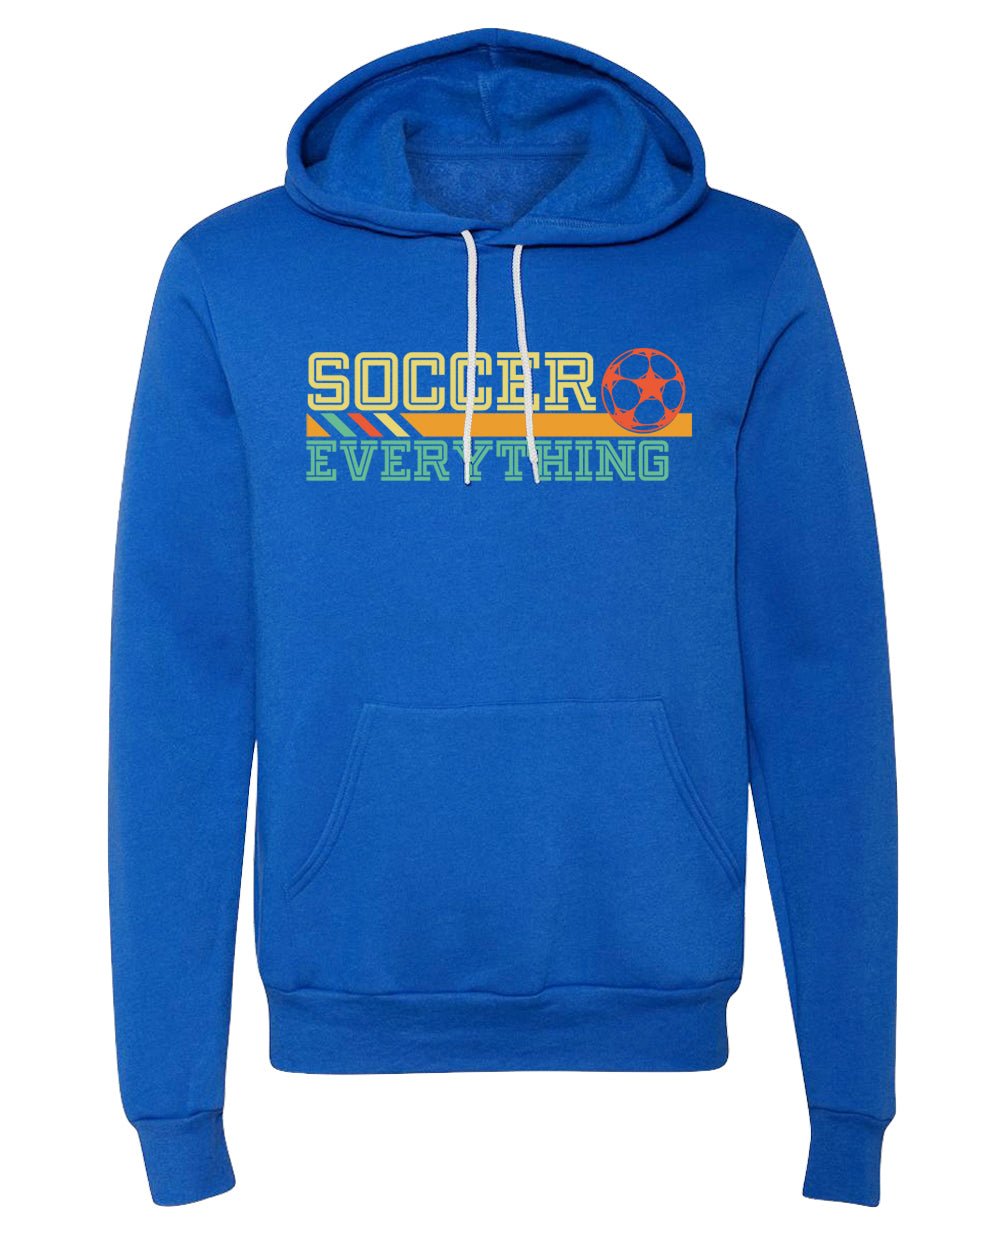 Soccer Over Everything Unisex Hoodies - Mato & Hash